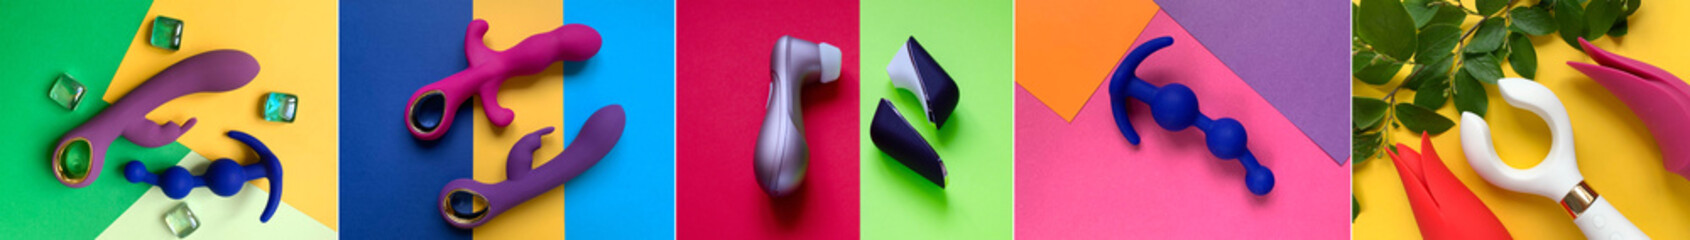 Collage of photos sex toys. Many vibrators and butt plugs on color background. Useful for adult, sex shop